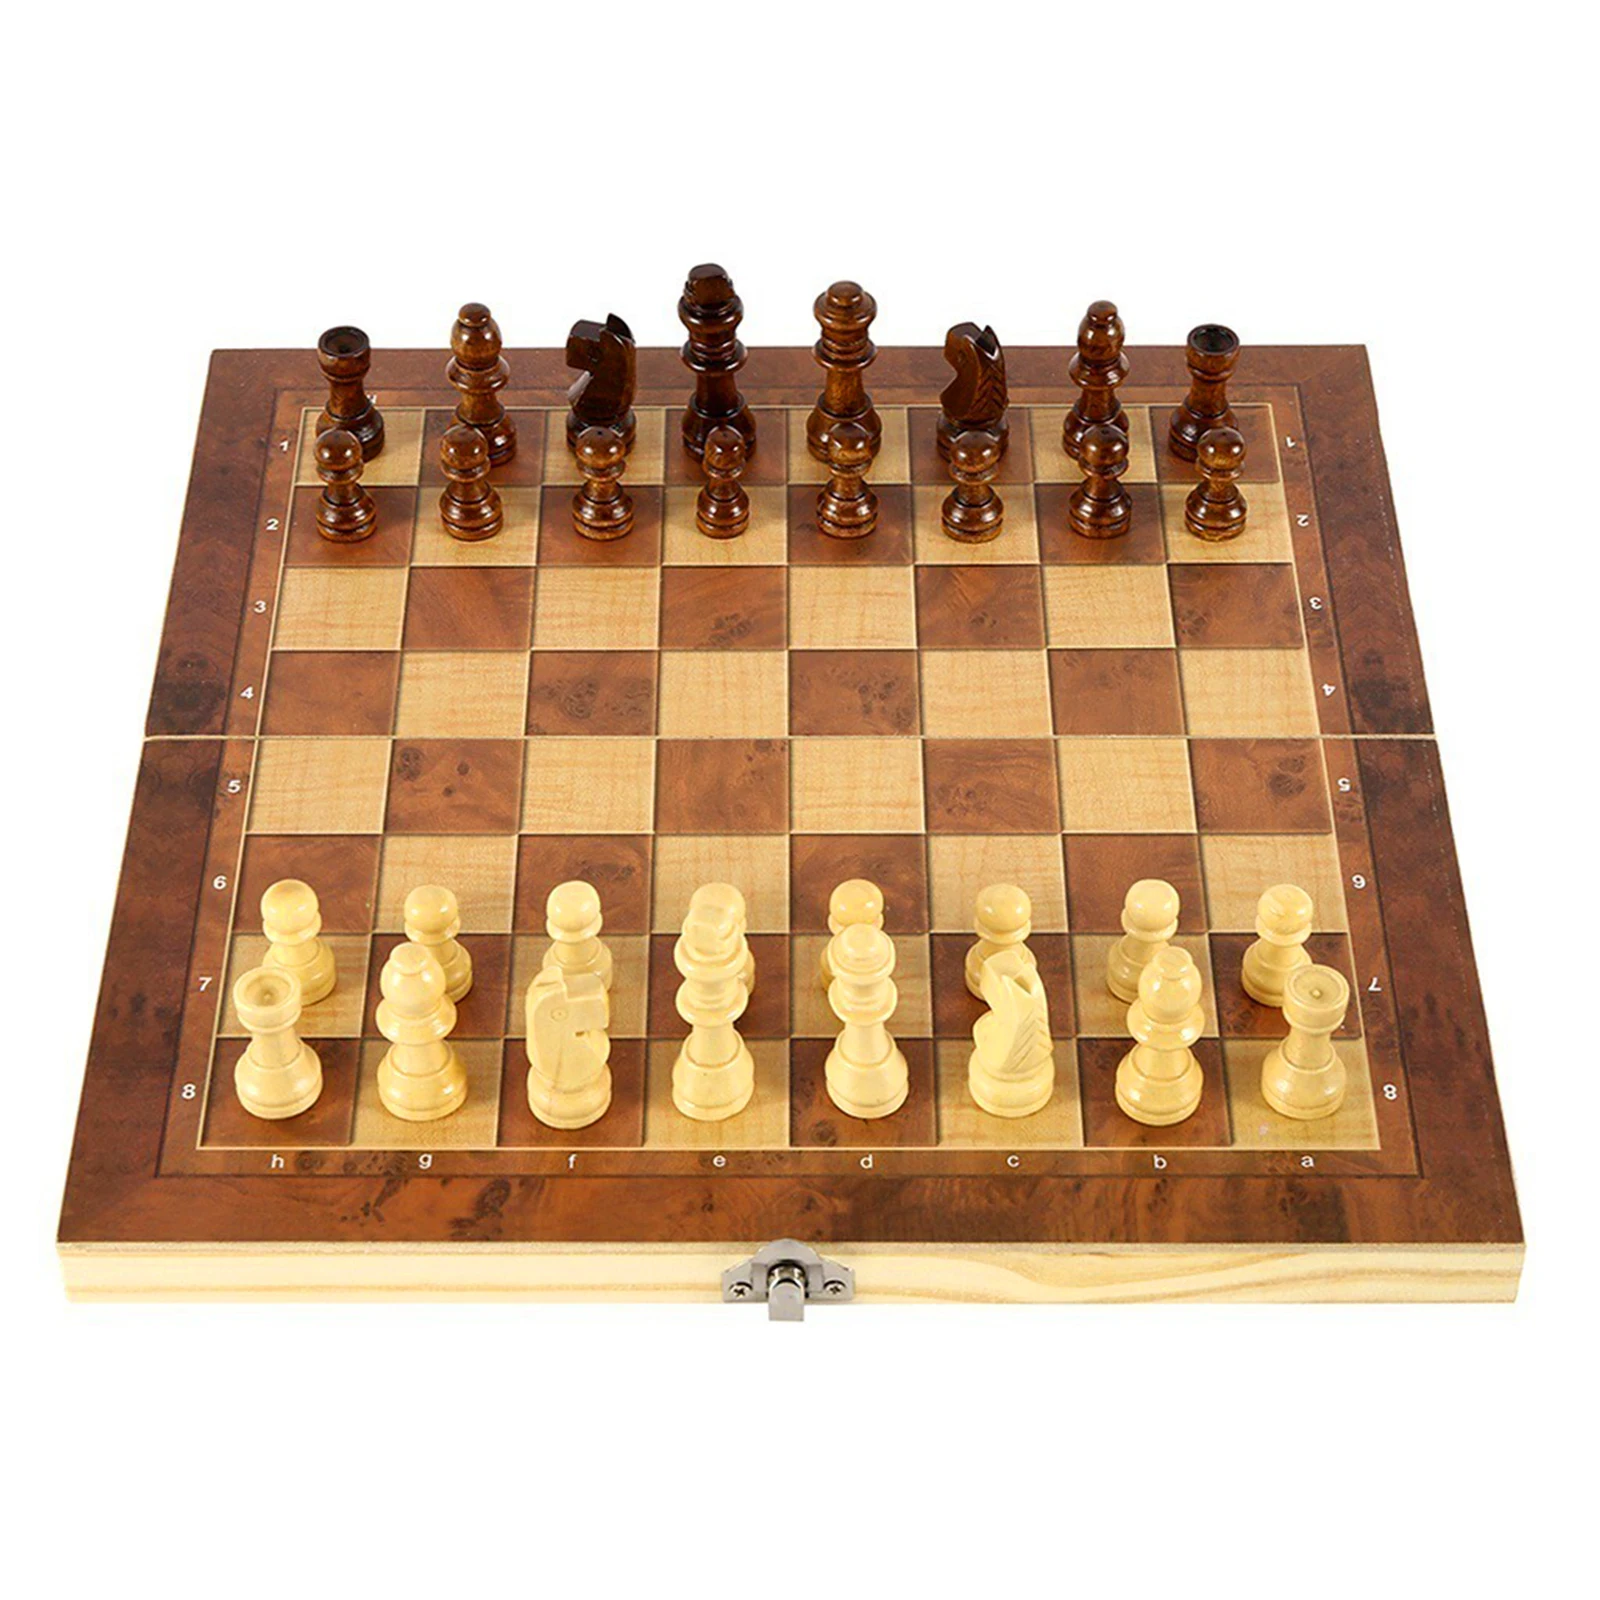 Buy Online Best Quality 3 in 1 Chess Set Wooden Chess Game Backgammon Checkers Indoor Chess For Family Wooden Folding Chessboard Chess Pieces Chessman